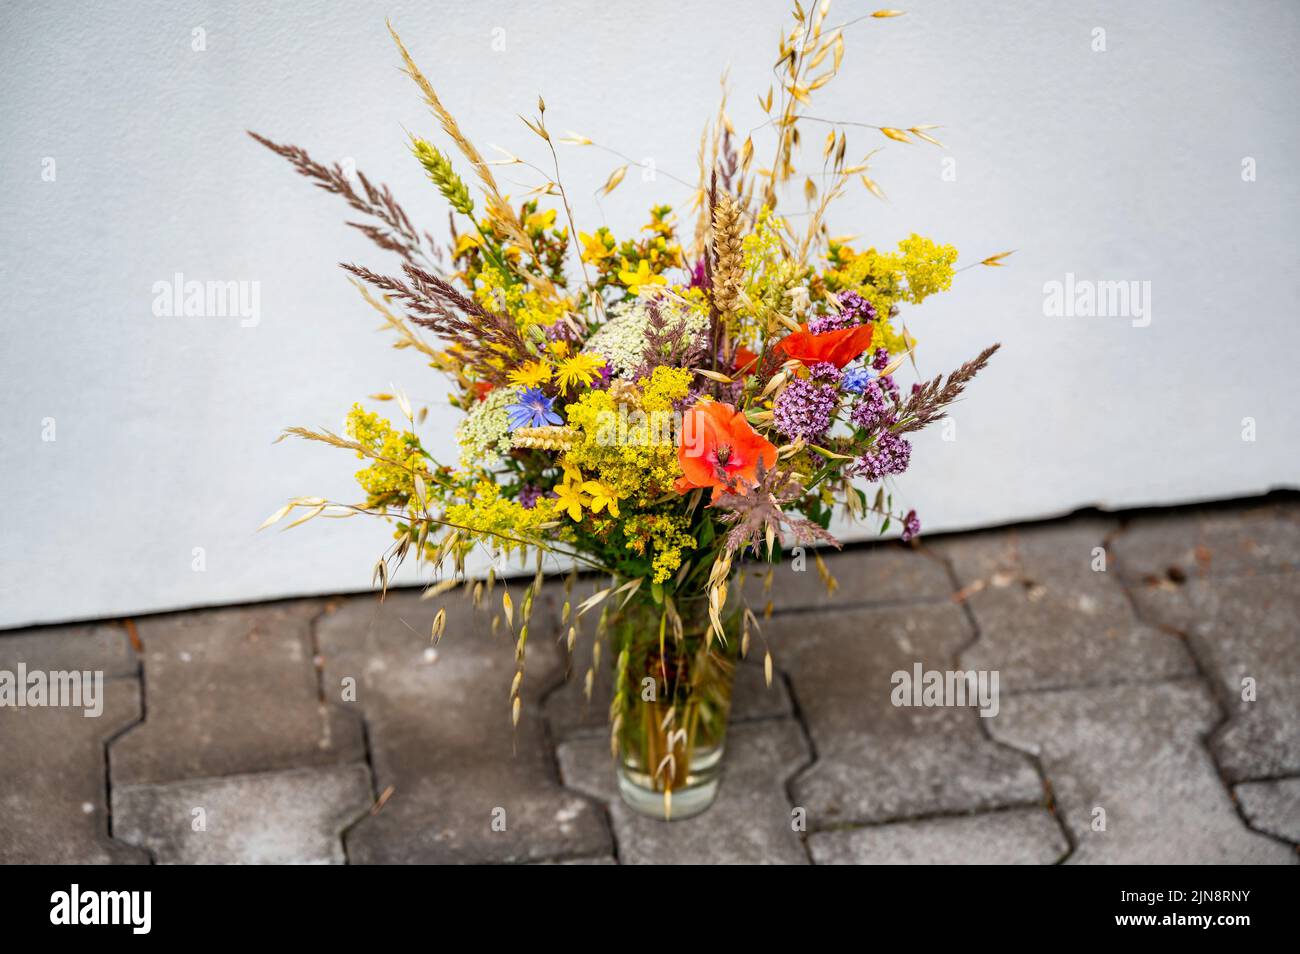 Bouquet of wild meadow and field flower in glass on paving and white backgroud wall. Stock Photo